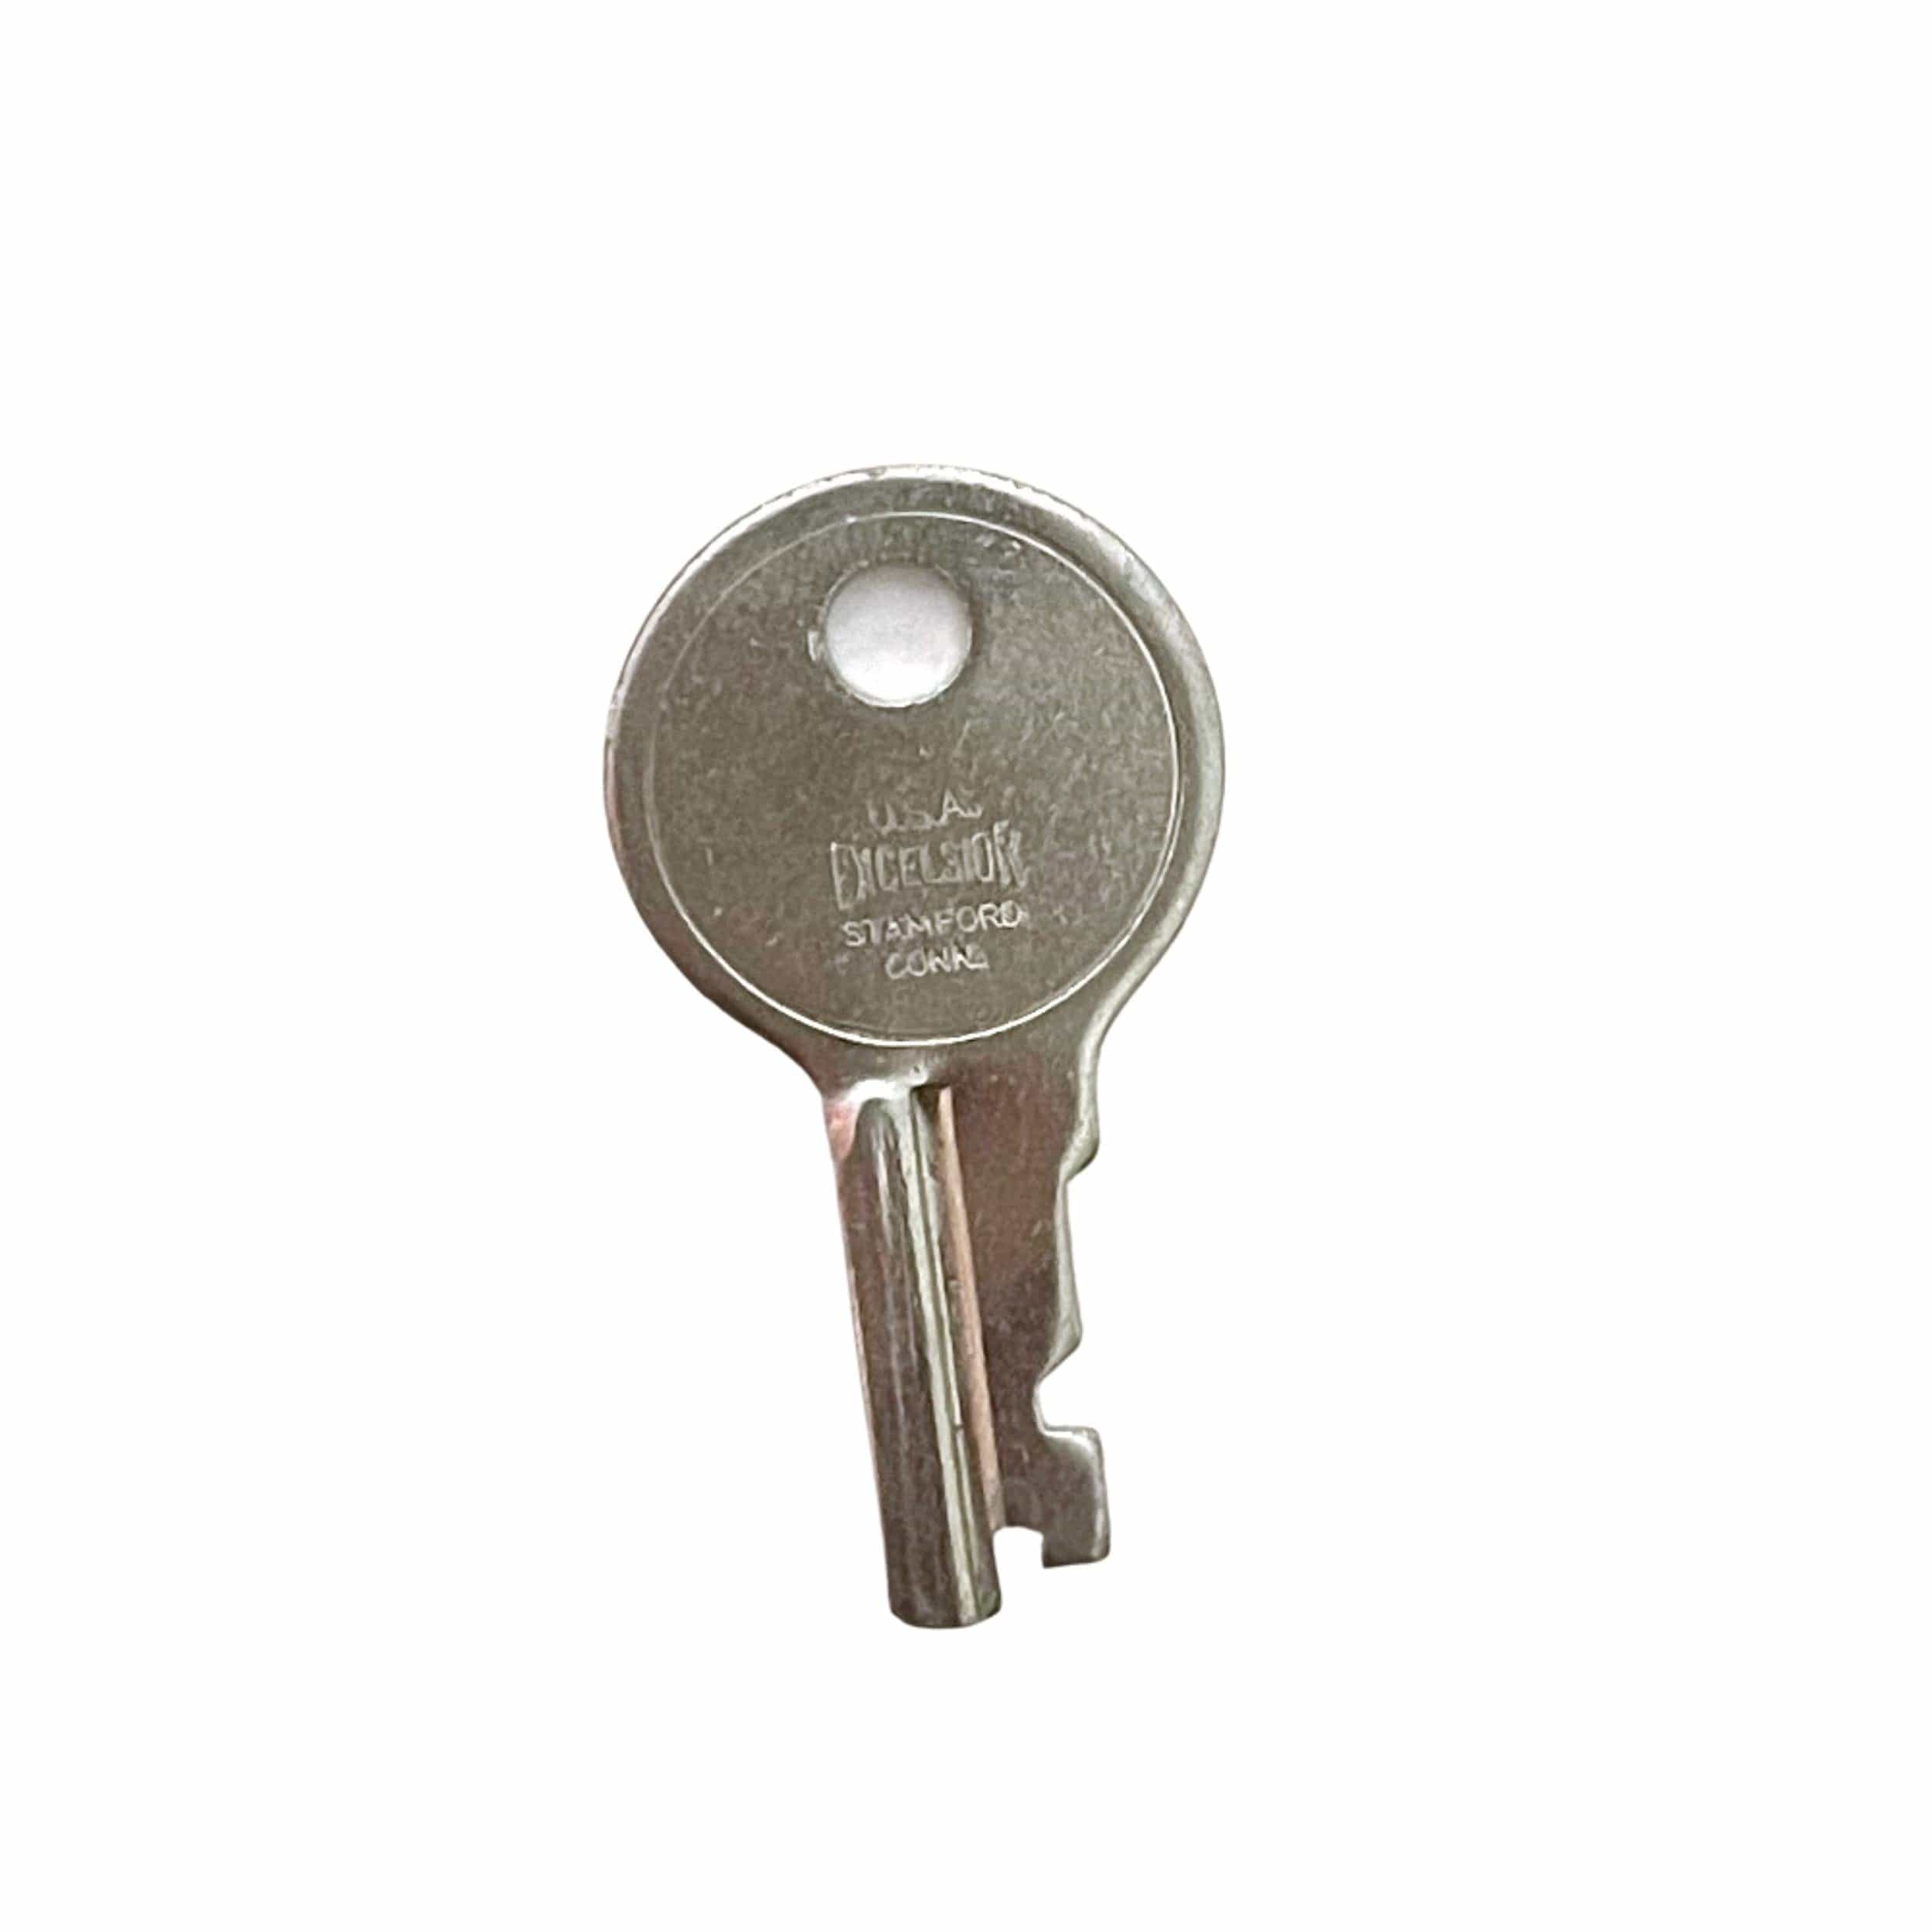 Extra Trunk Lock Key for G-1 and G-3, Steel, 5pk, #T-46K